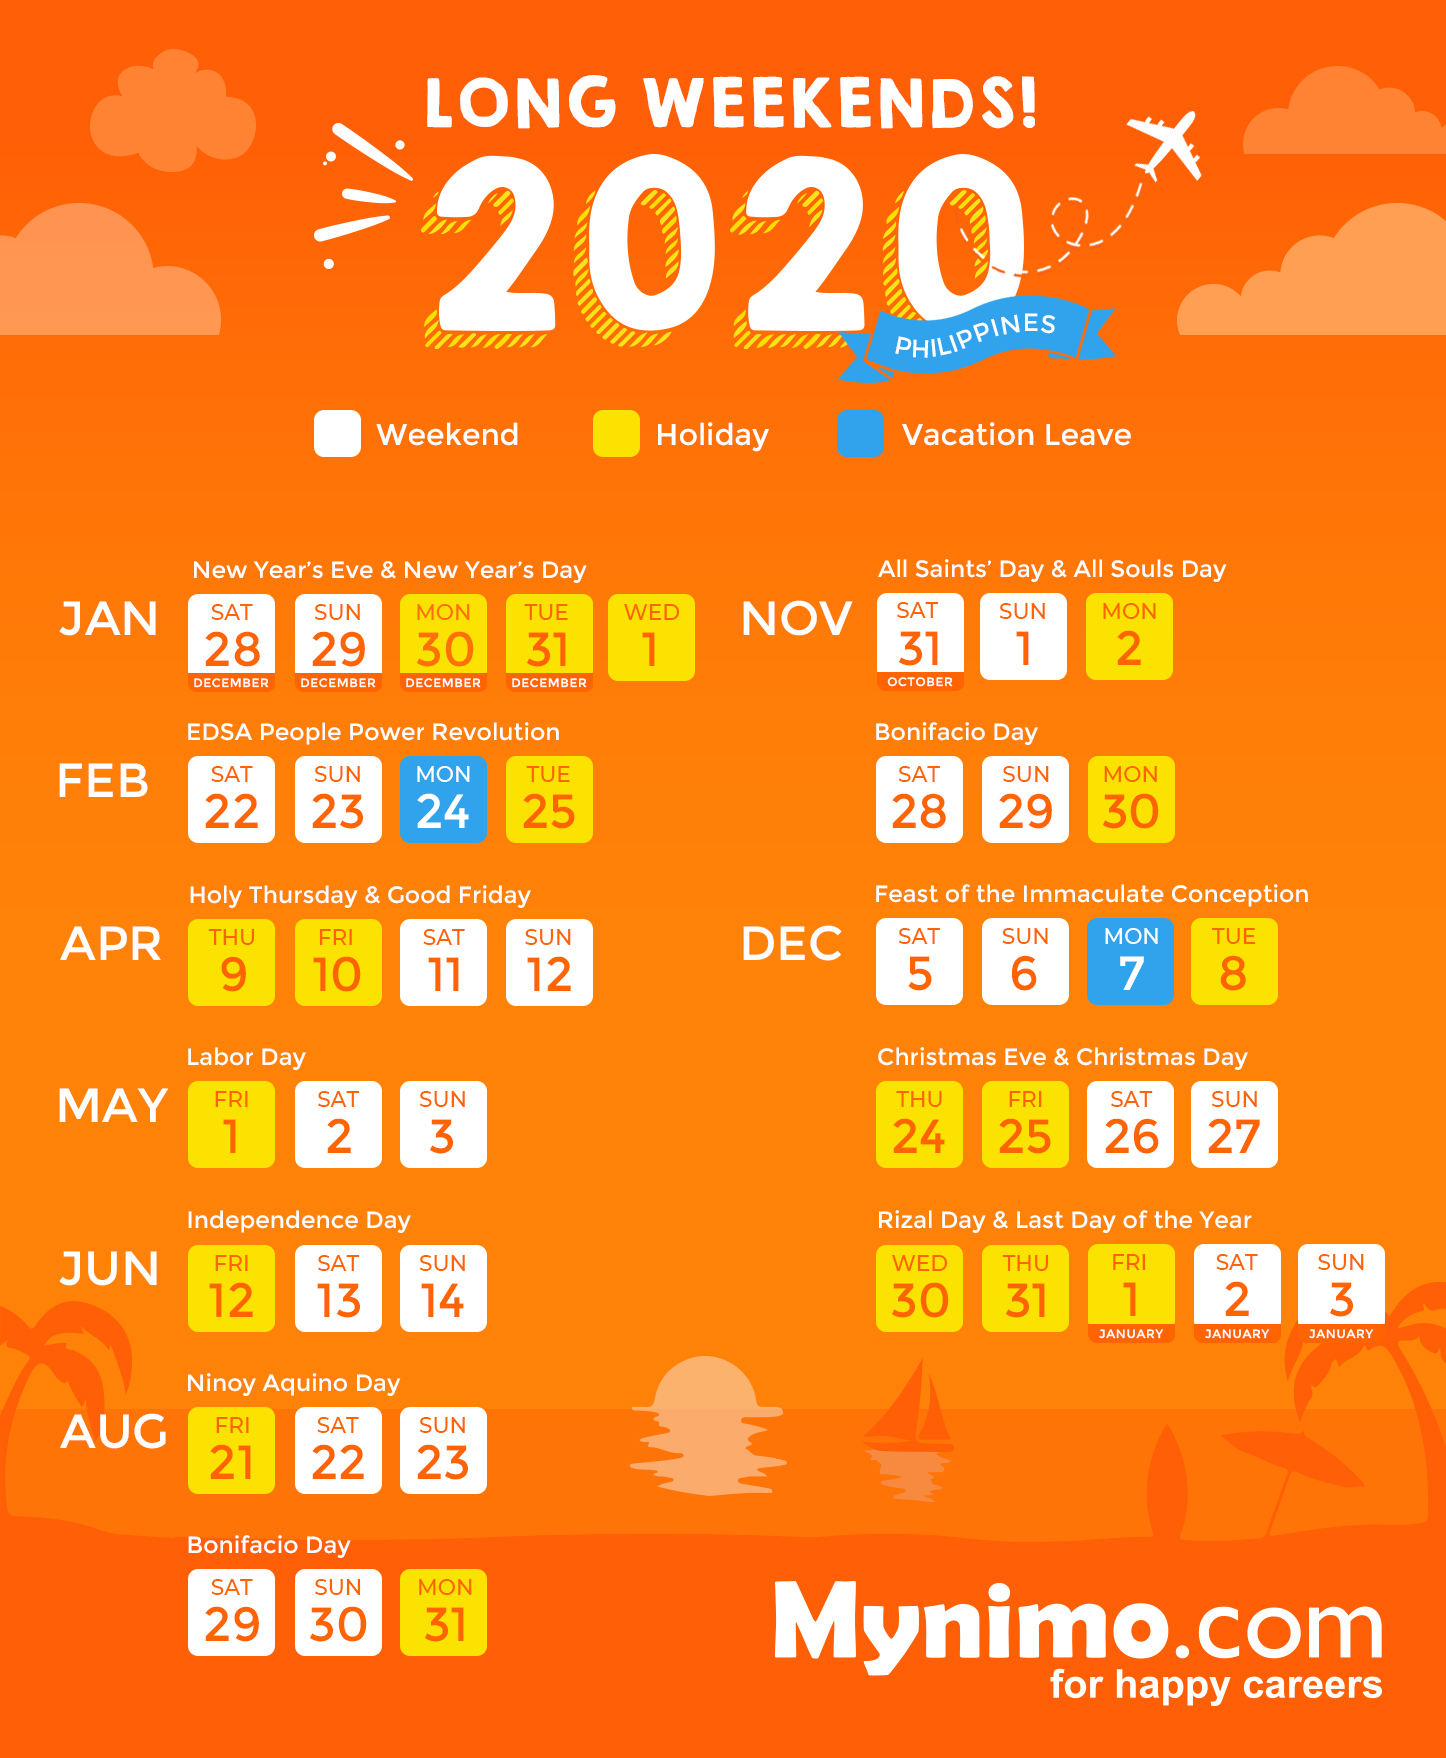 Holiday August 2021 Philippines - List of holidays for 2021 in the ...